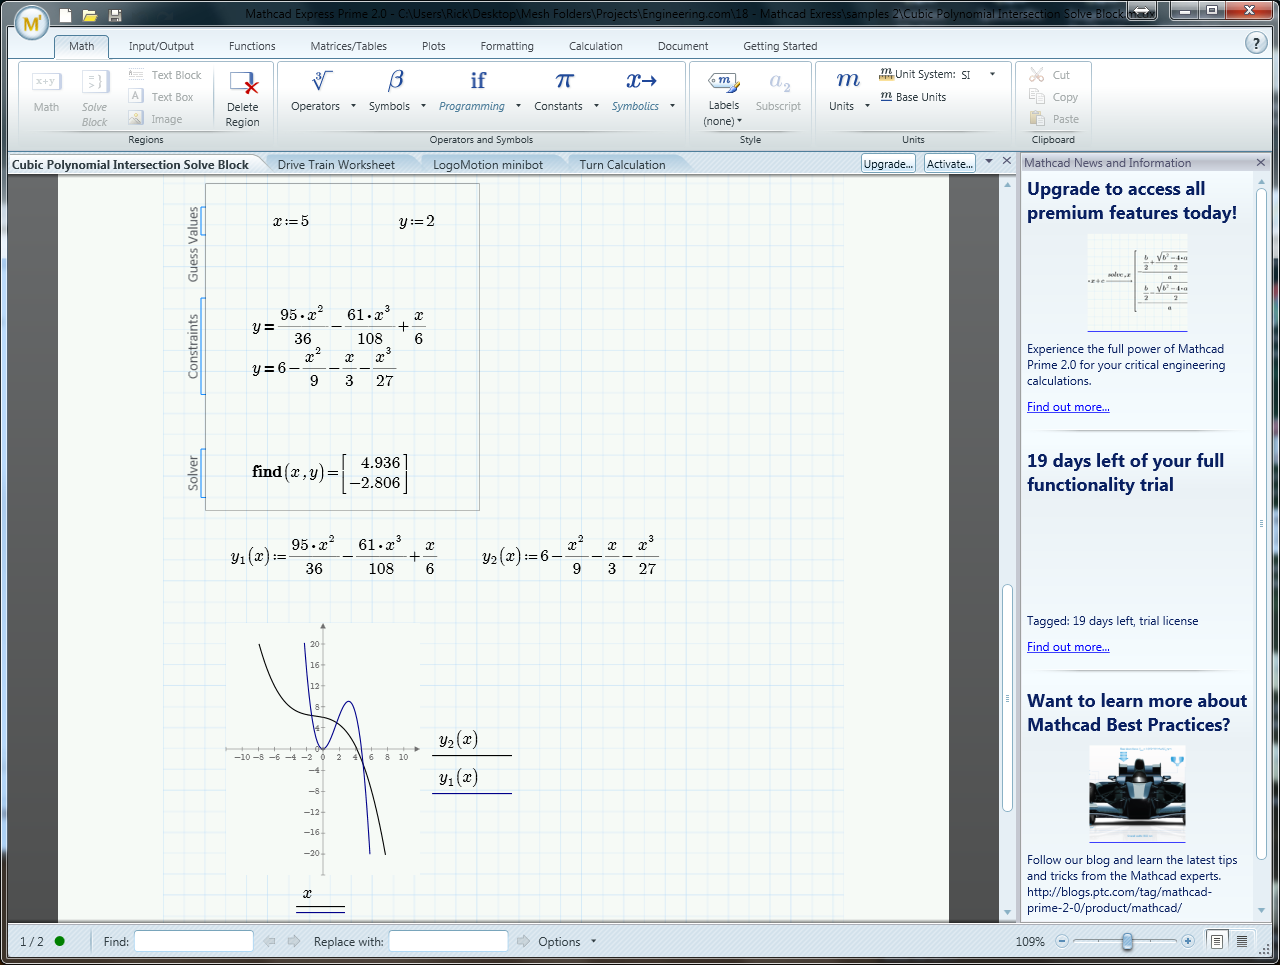 mathcad free download full version with crack